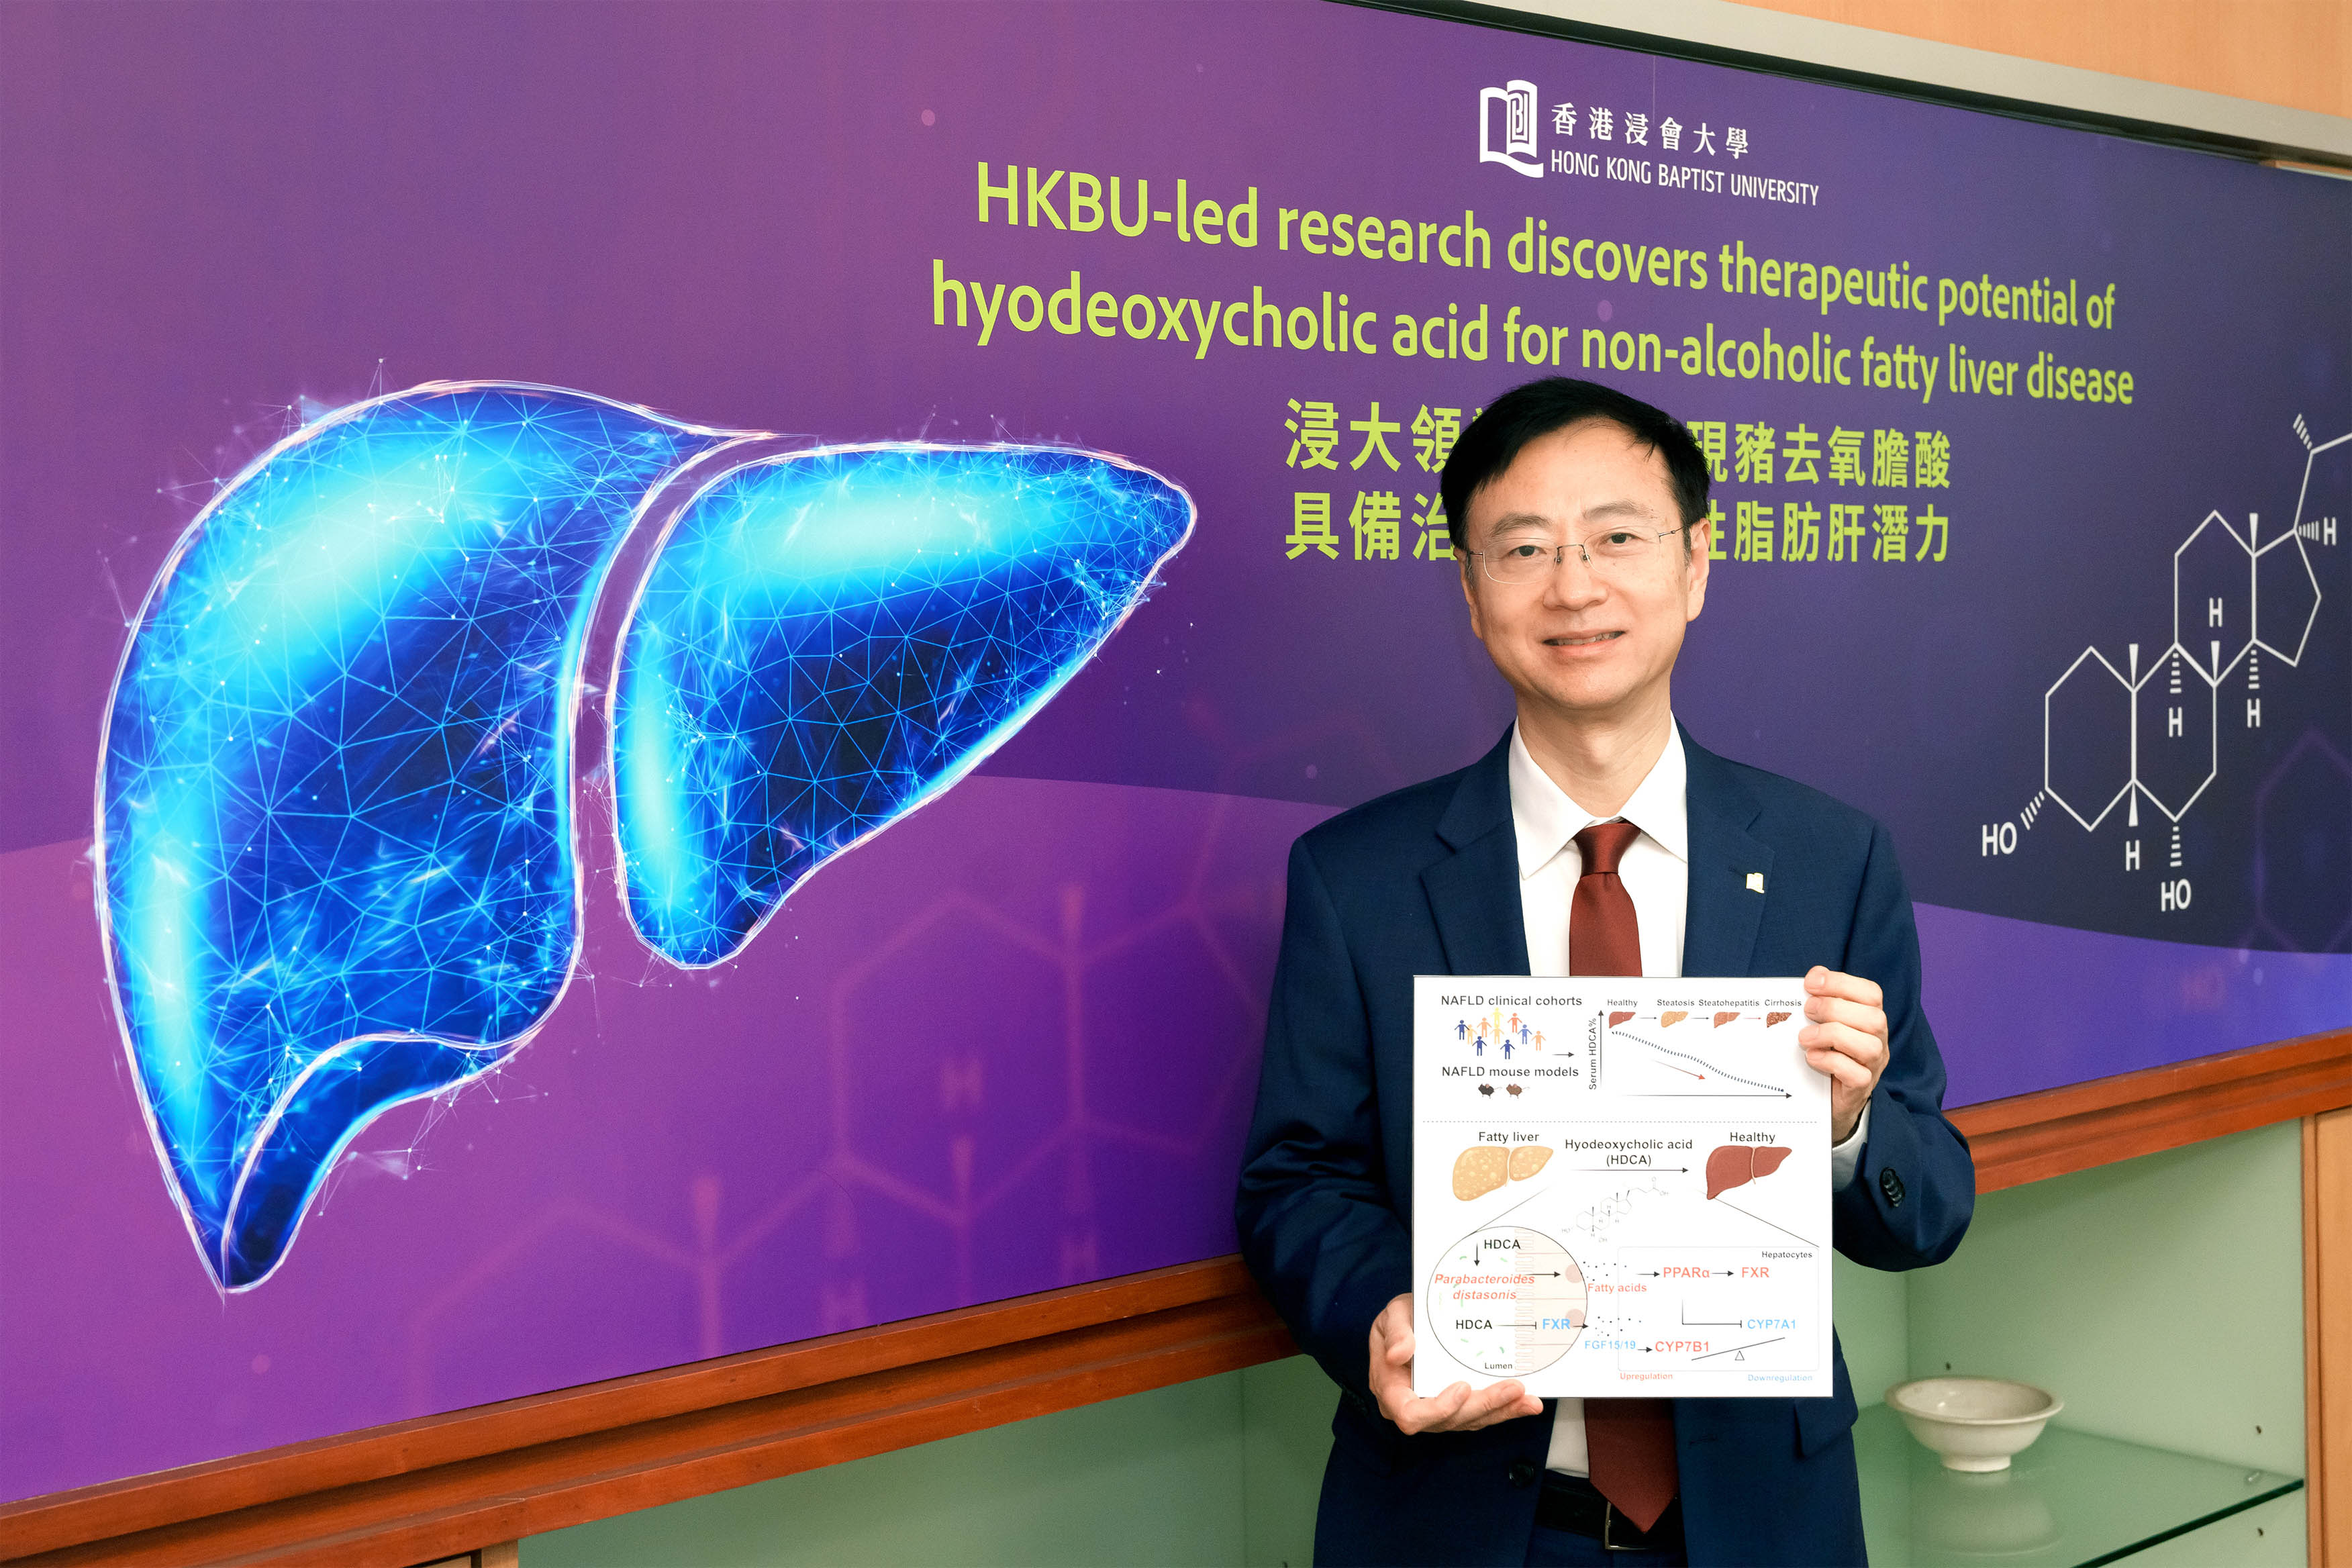 Can non-alcoholic fatty liver disease be cured? HKBU research offers hope